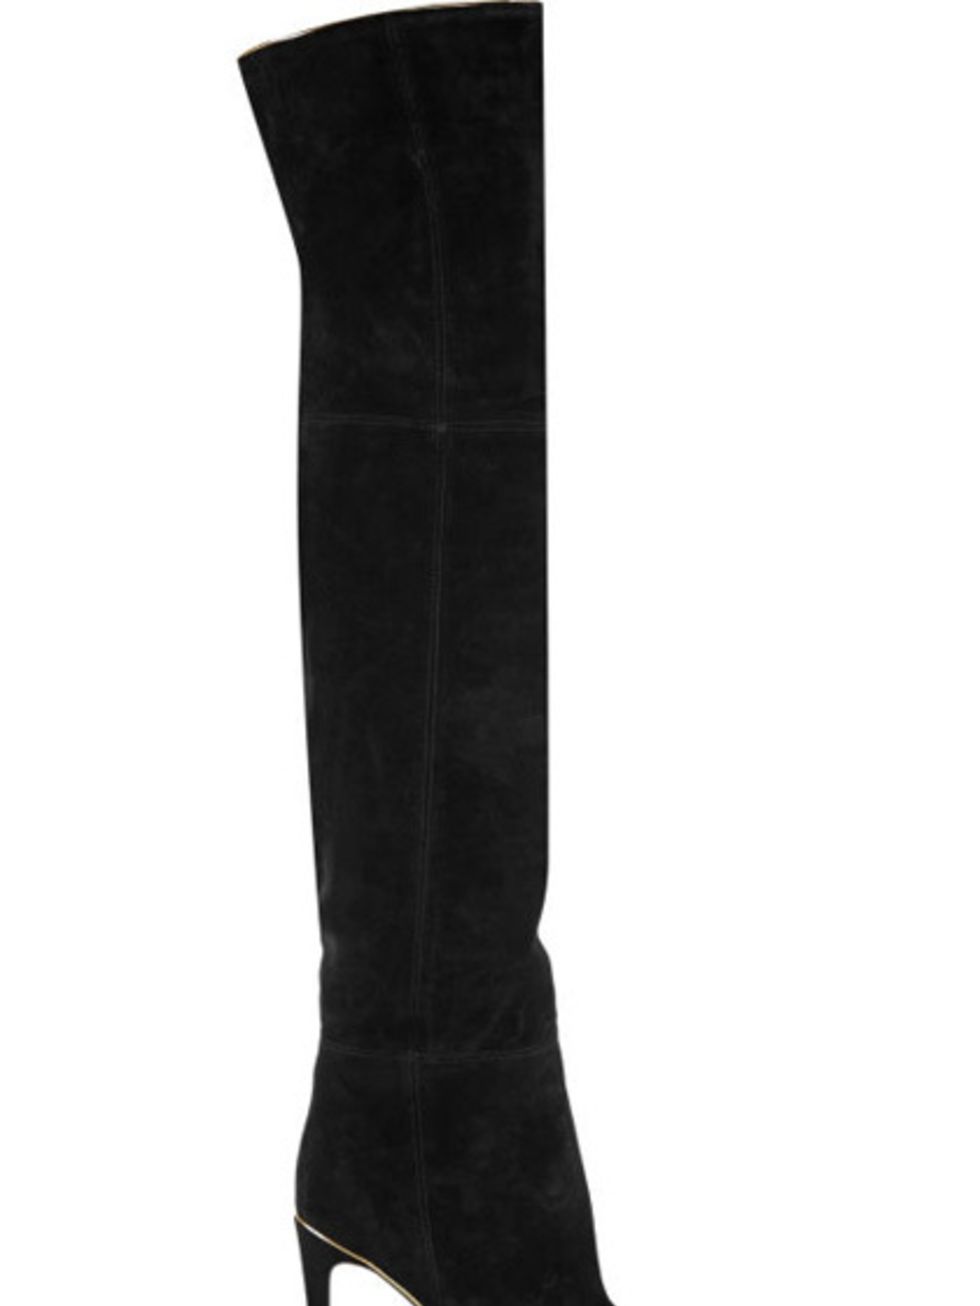 White, Boot, Costume accessory, Black, Knee-high boot, Sock, Leather, Synthetic rubber, 